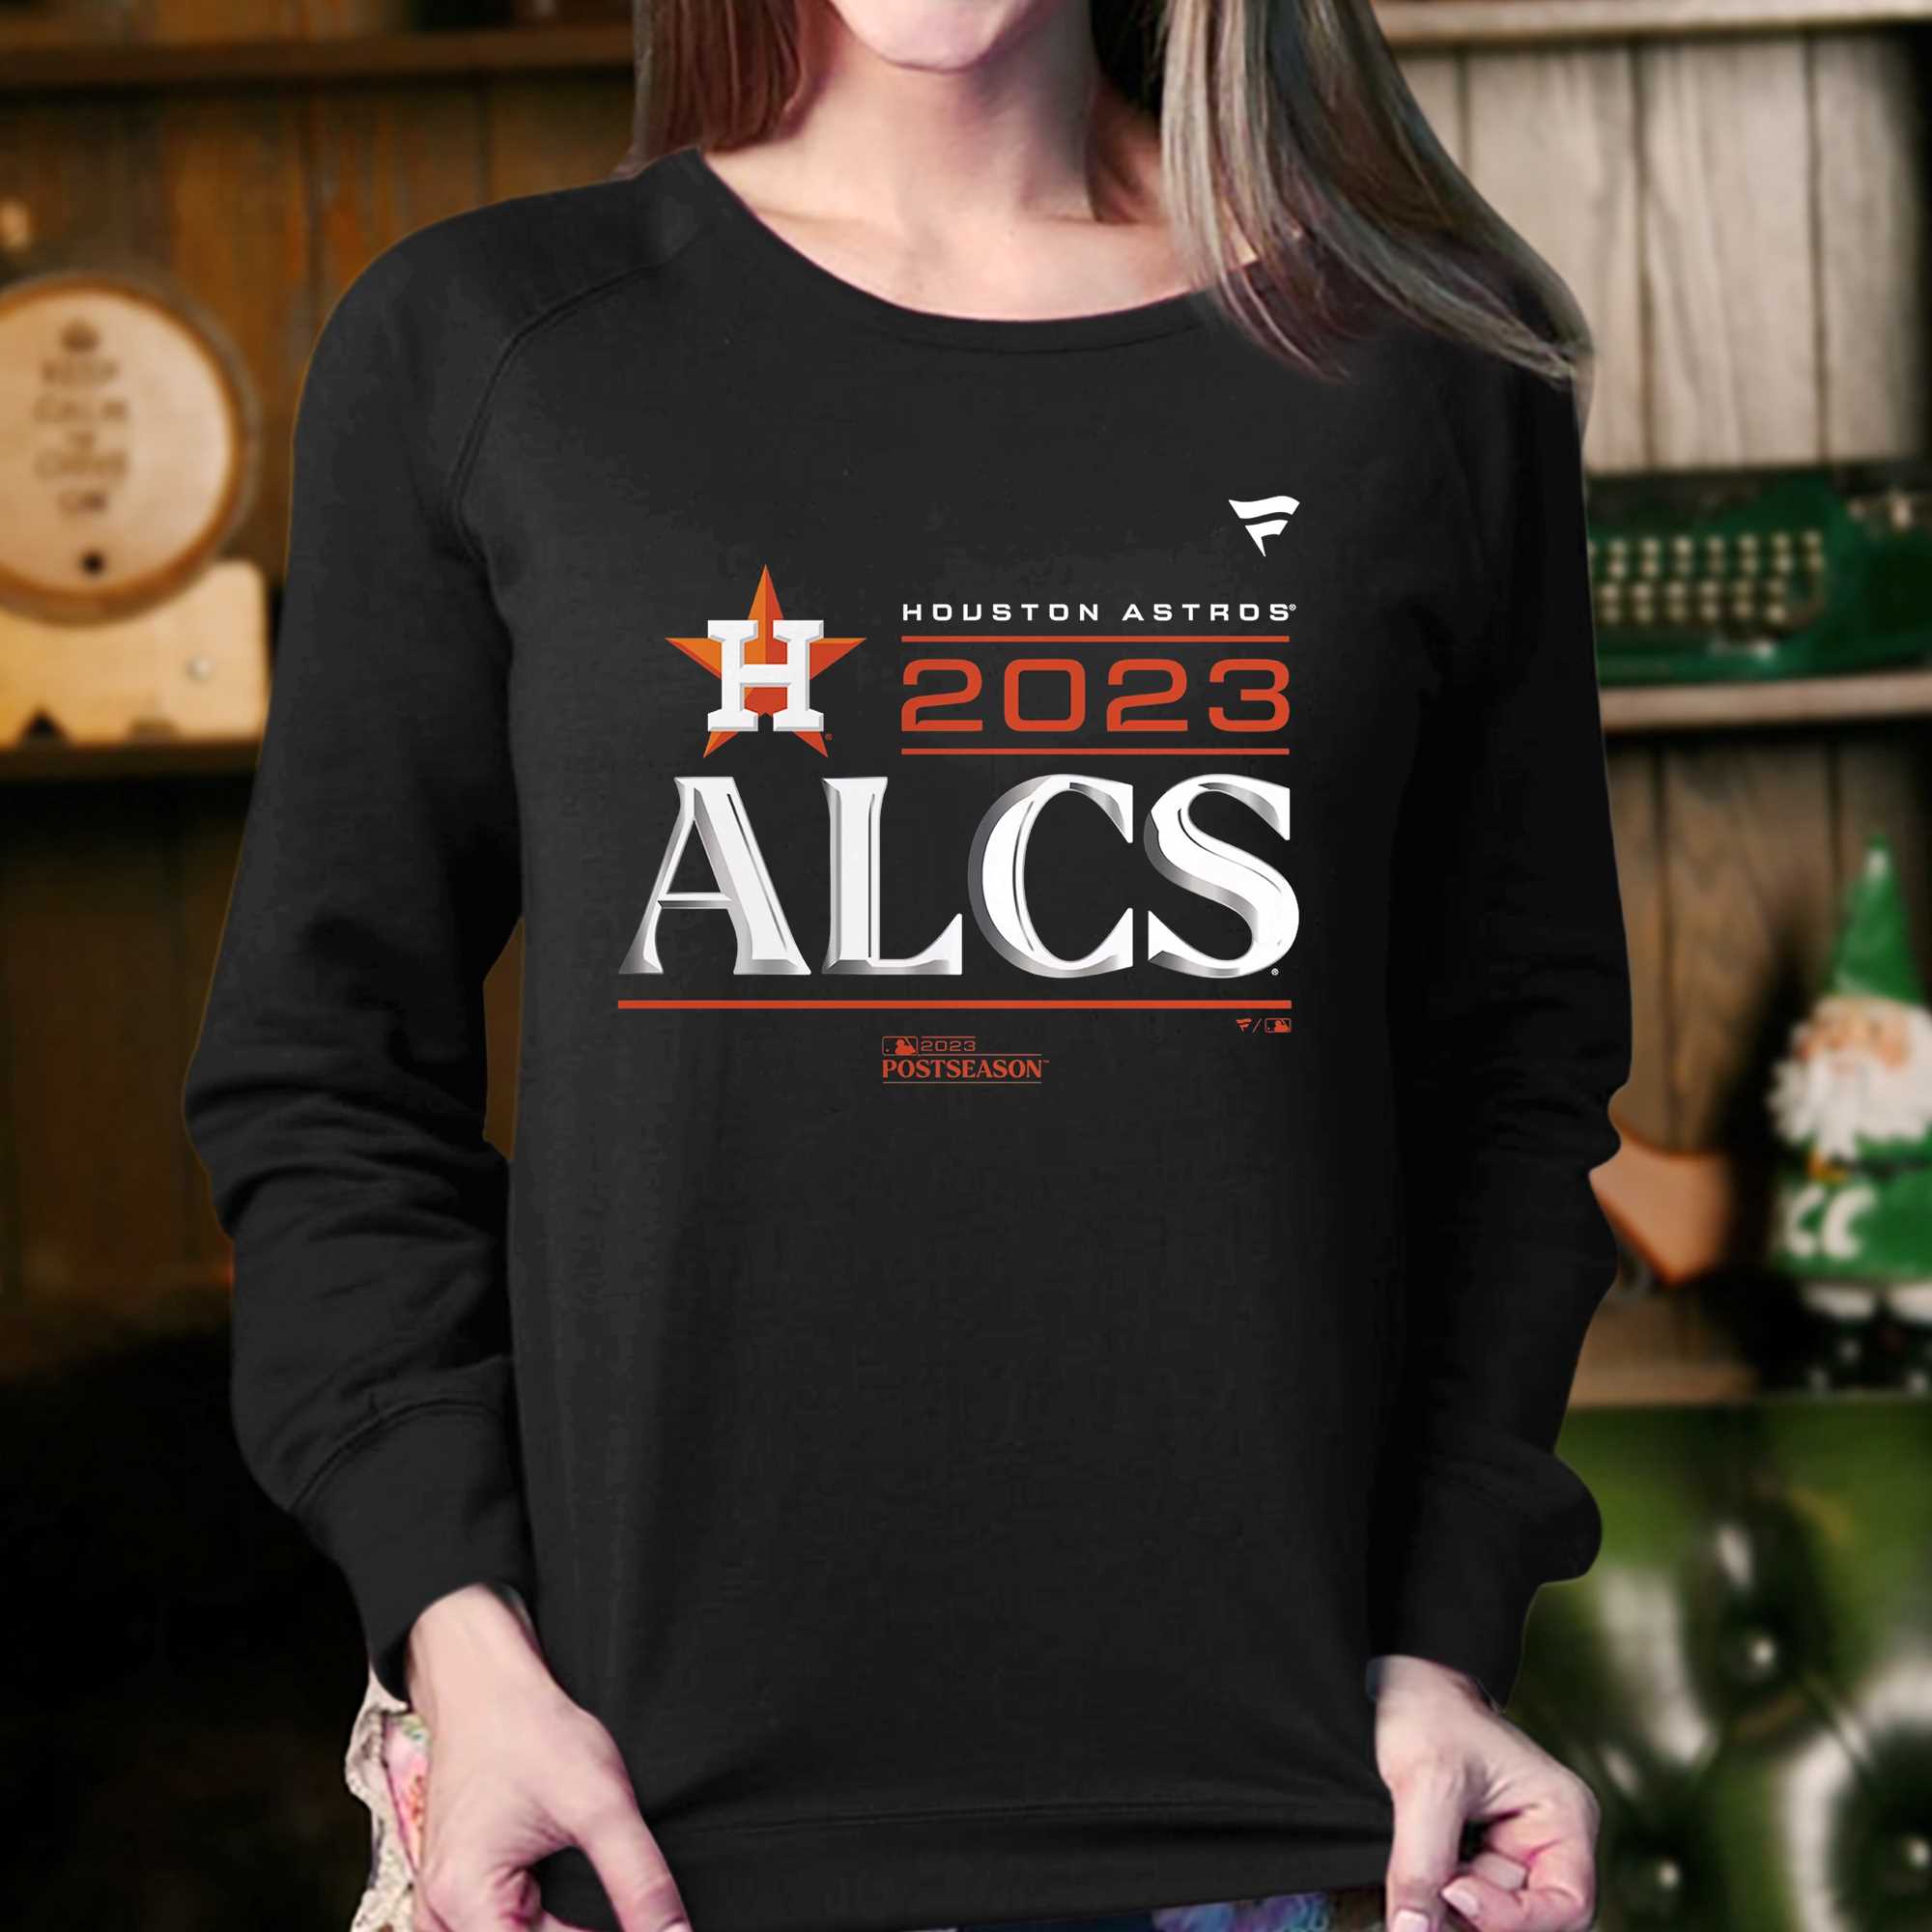 Houston Astros Jerseys, Hoodies, T-shirts and more - Astros Store